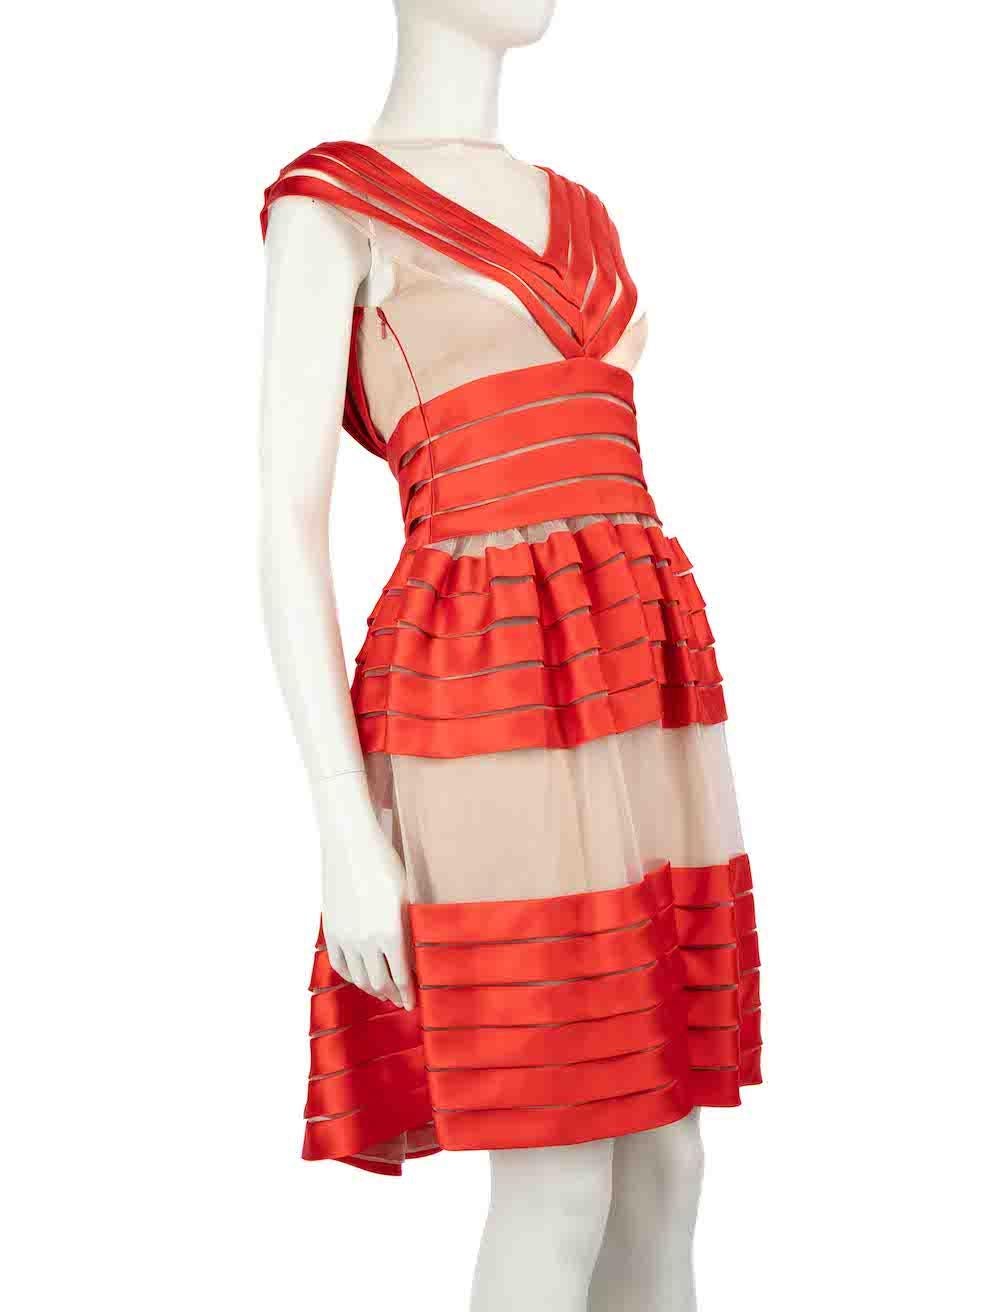 CONDITION is Very good. Minimal wear to dress is evident. Minimal wear to the back, near the waist and on the hemline is seen with discolouration marks and pulls to the weave on the back of this used Temperley London designer resale item.
 
 
 
